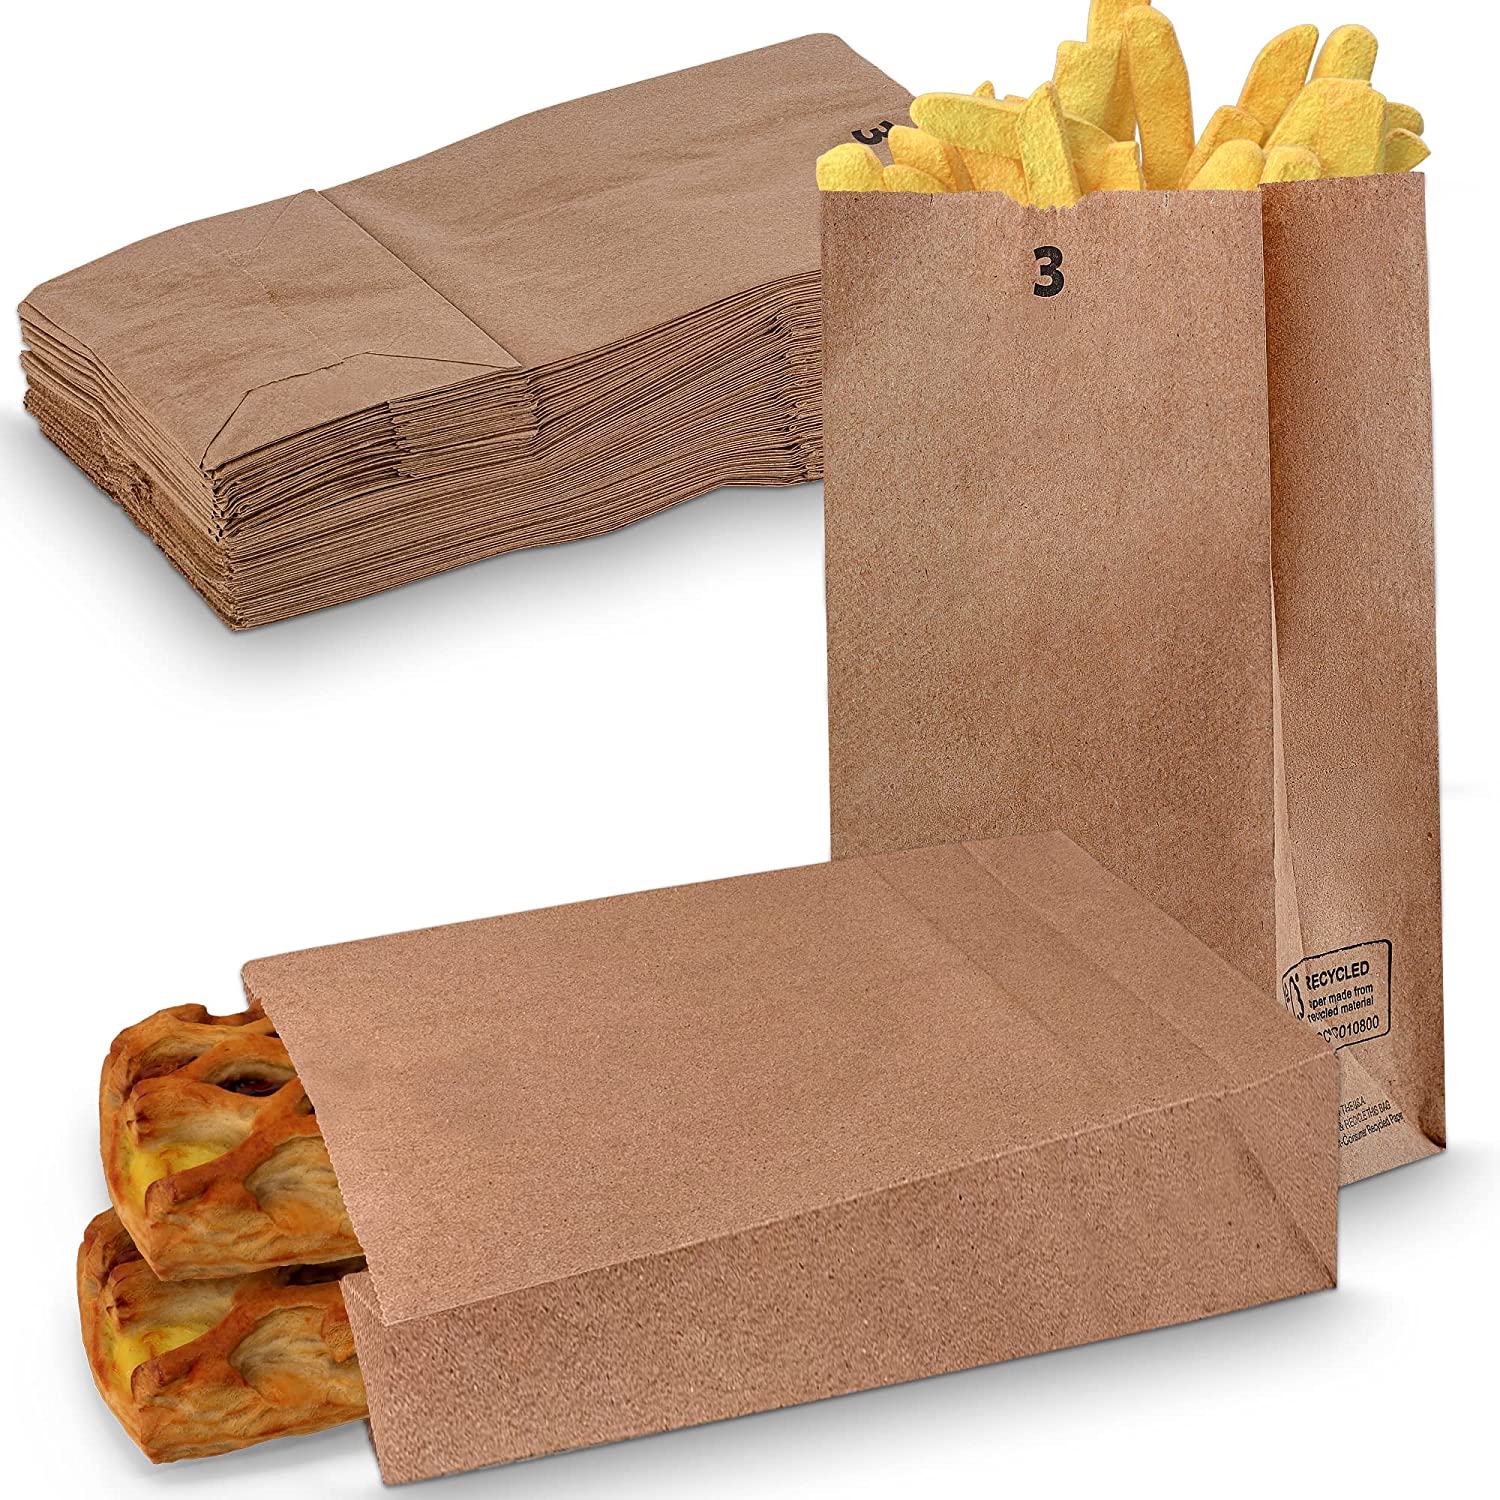  MT Products Small White Paper Bags - 3 lb. Kraft Paper Grocery  Bags - 100 Pieces Strong and Durable Bakery Bags - Paper Bread Bags - Made  in the USA : Industrial & Scientific